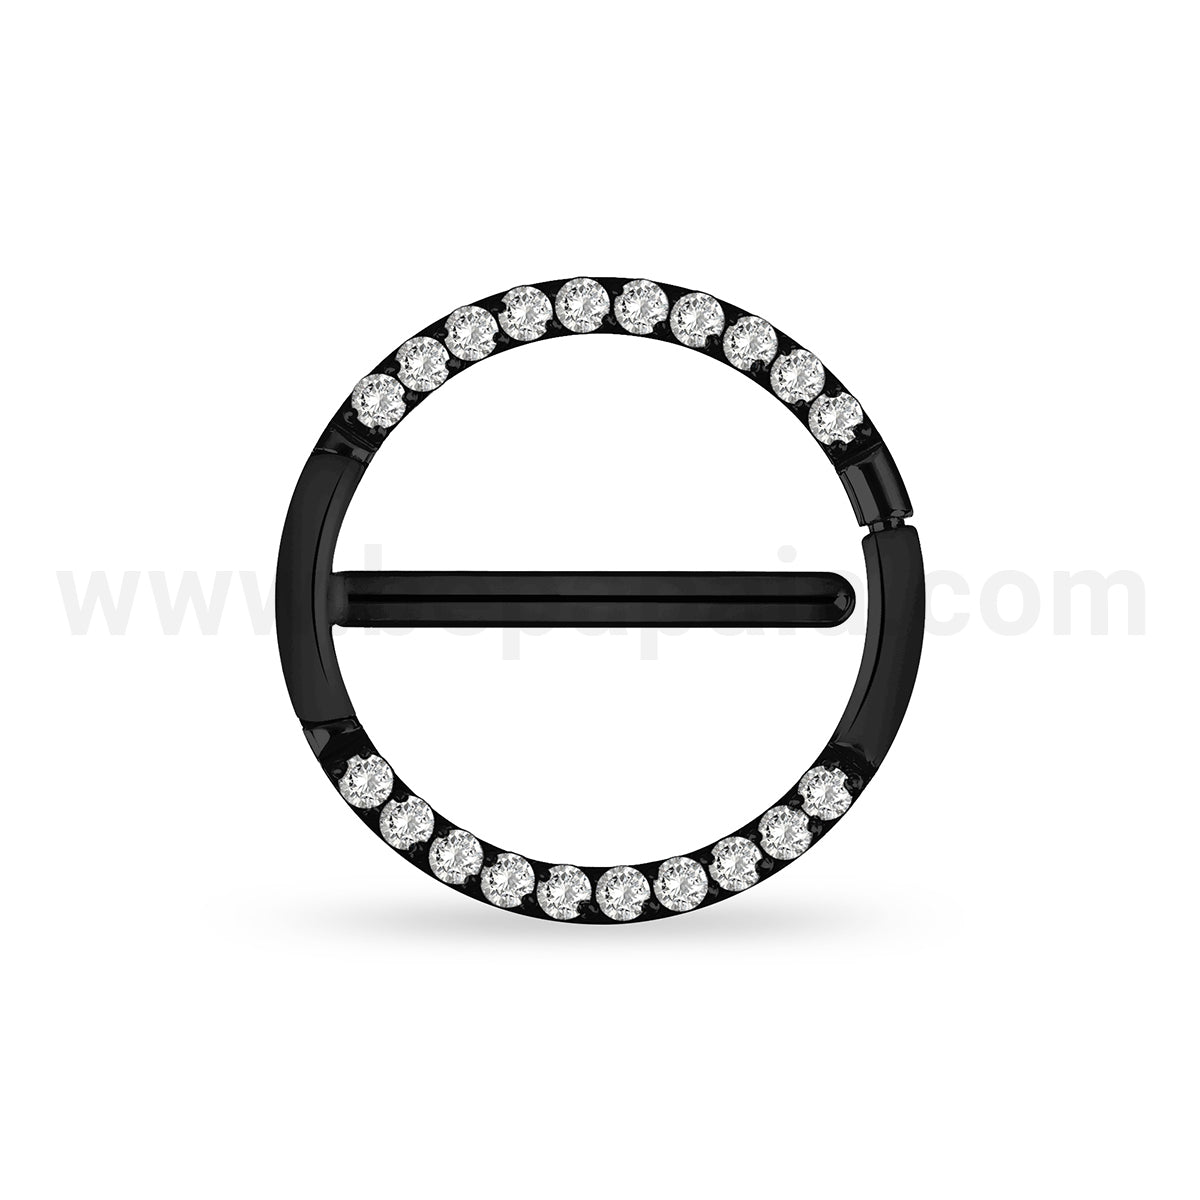 Surgical steel nipple hinged ring piercing with gems